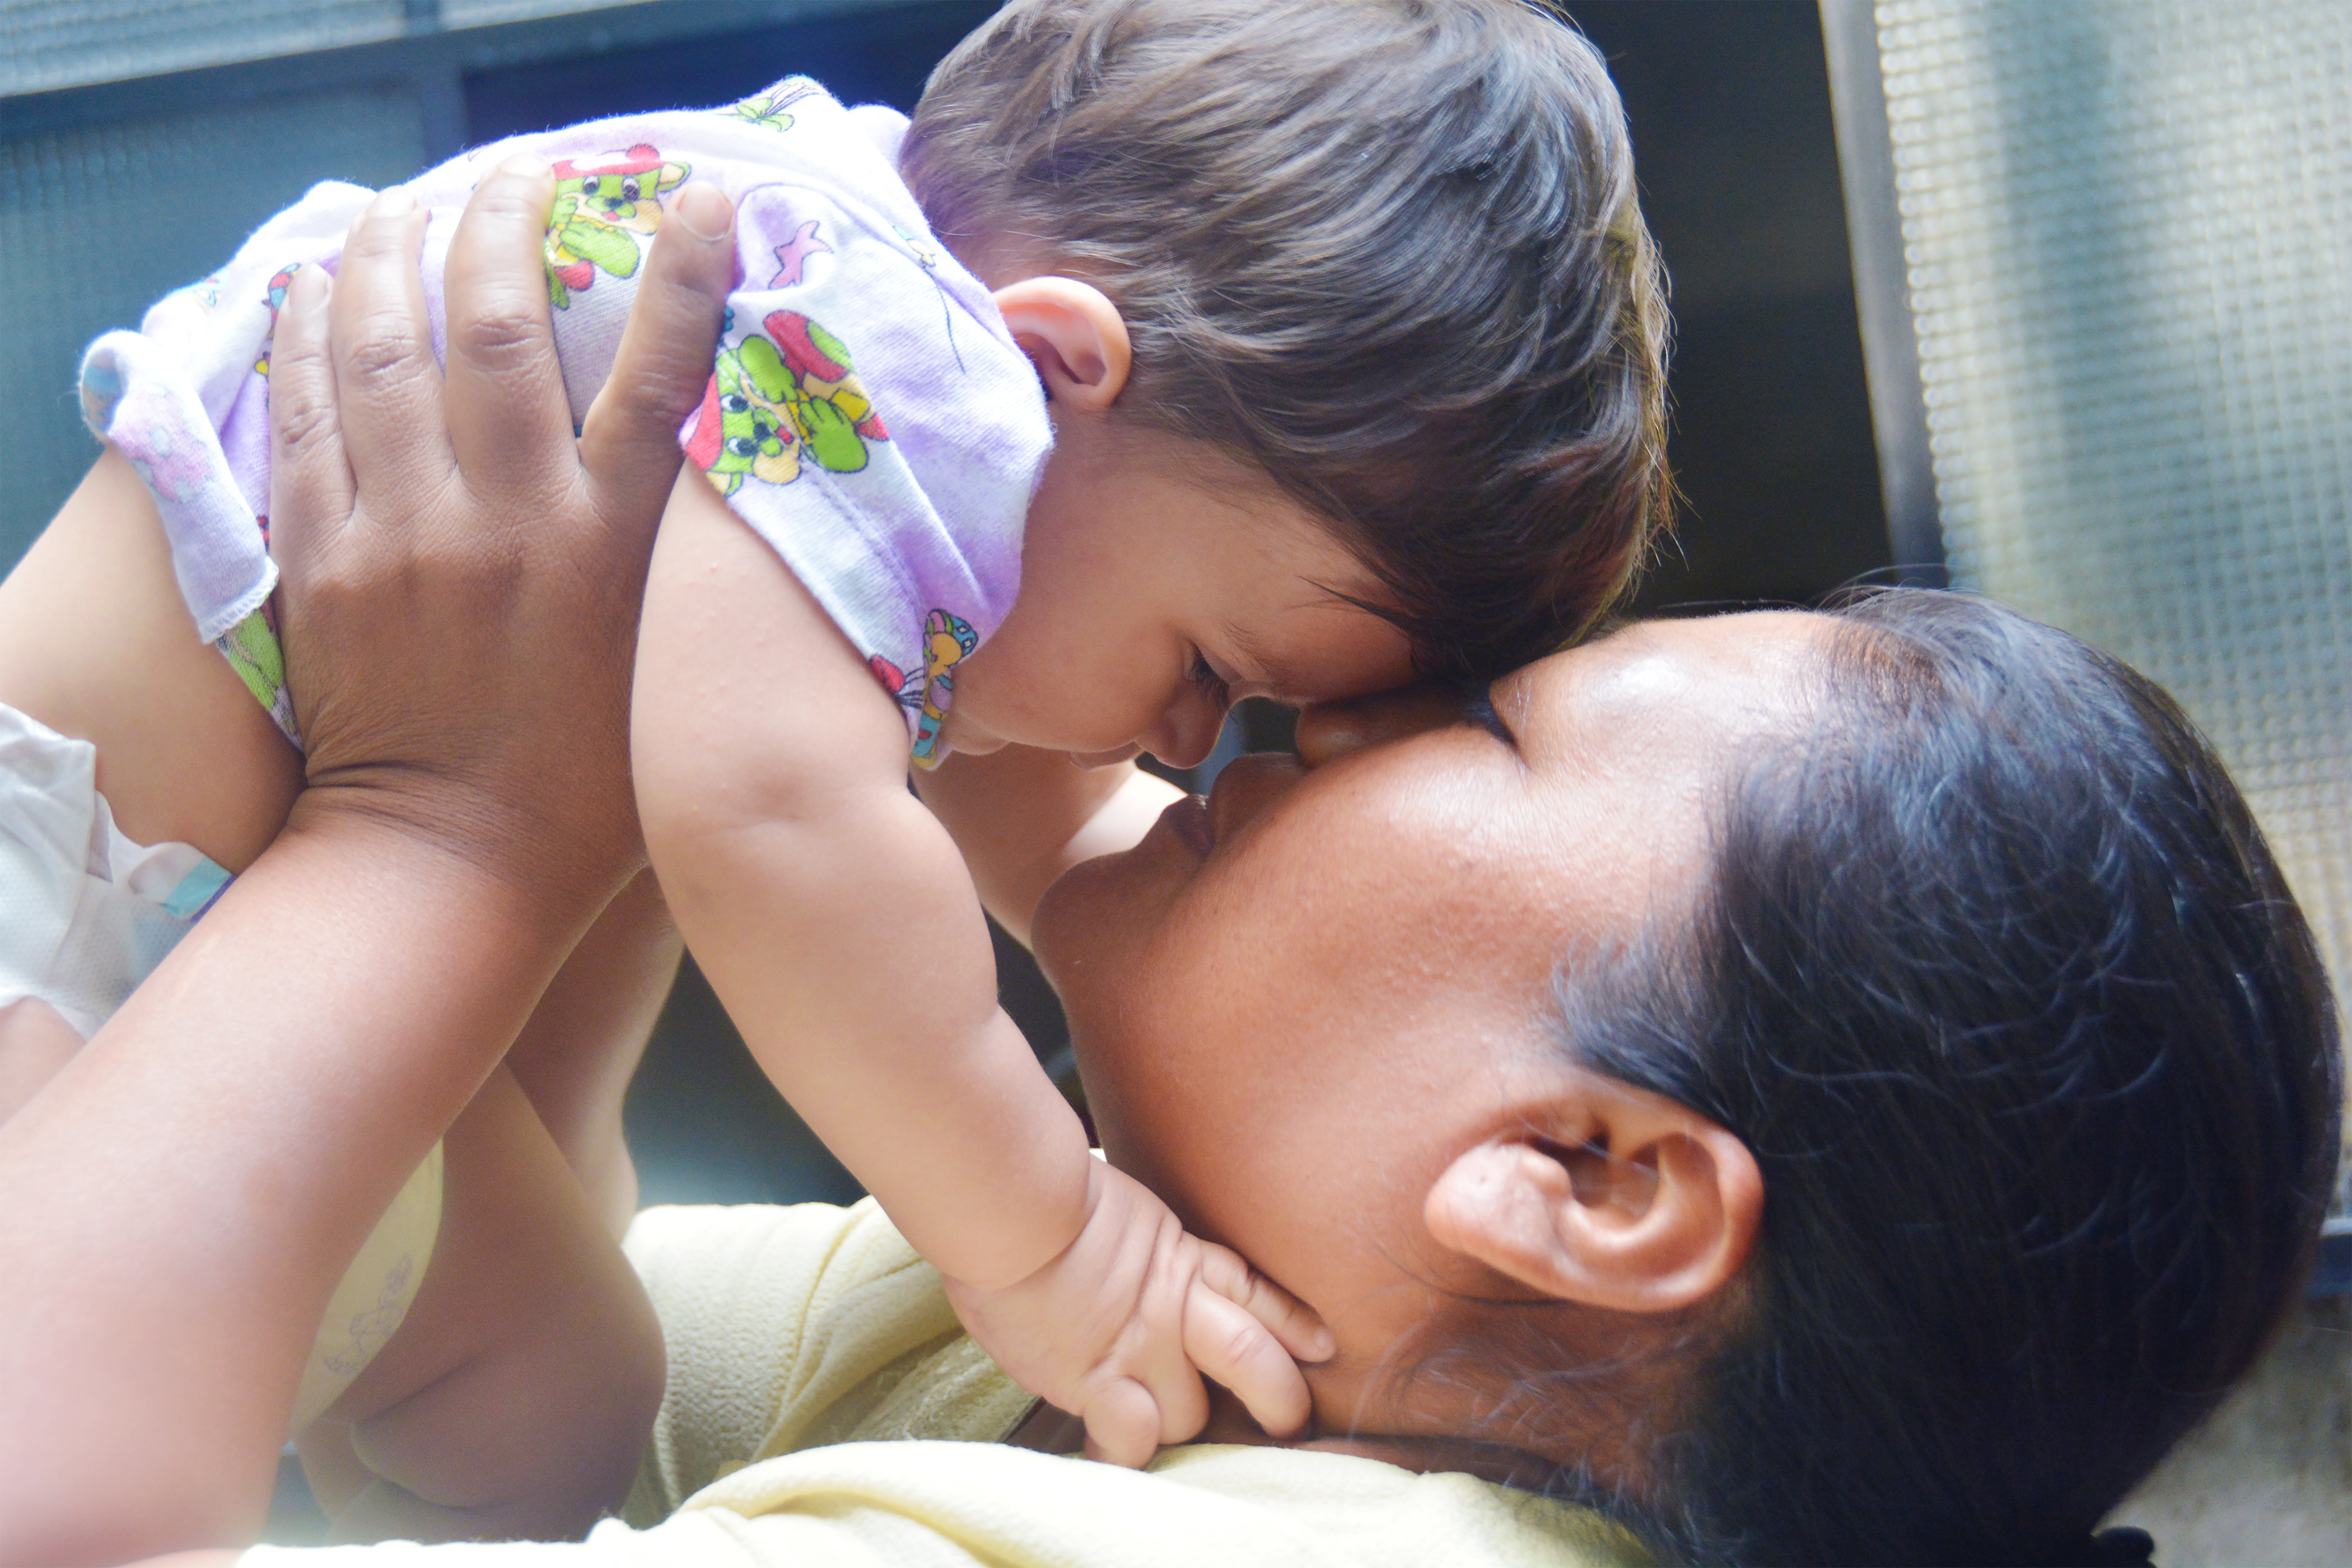 Woman holding baby above her head about to kiss her